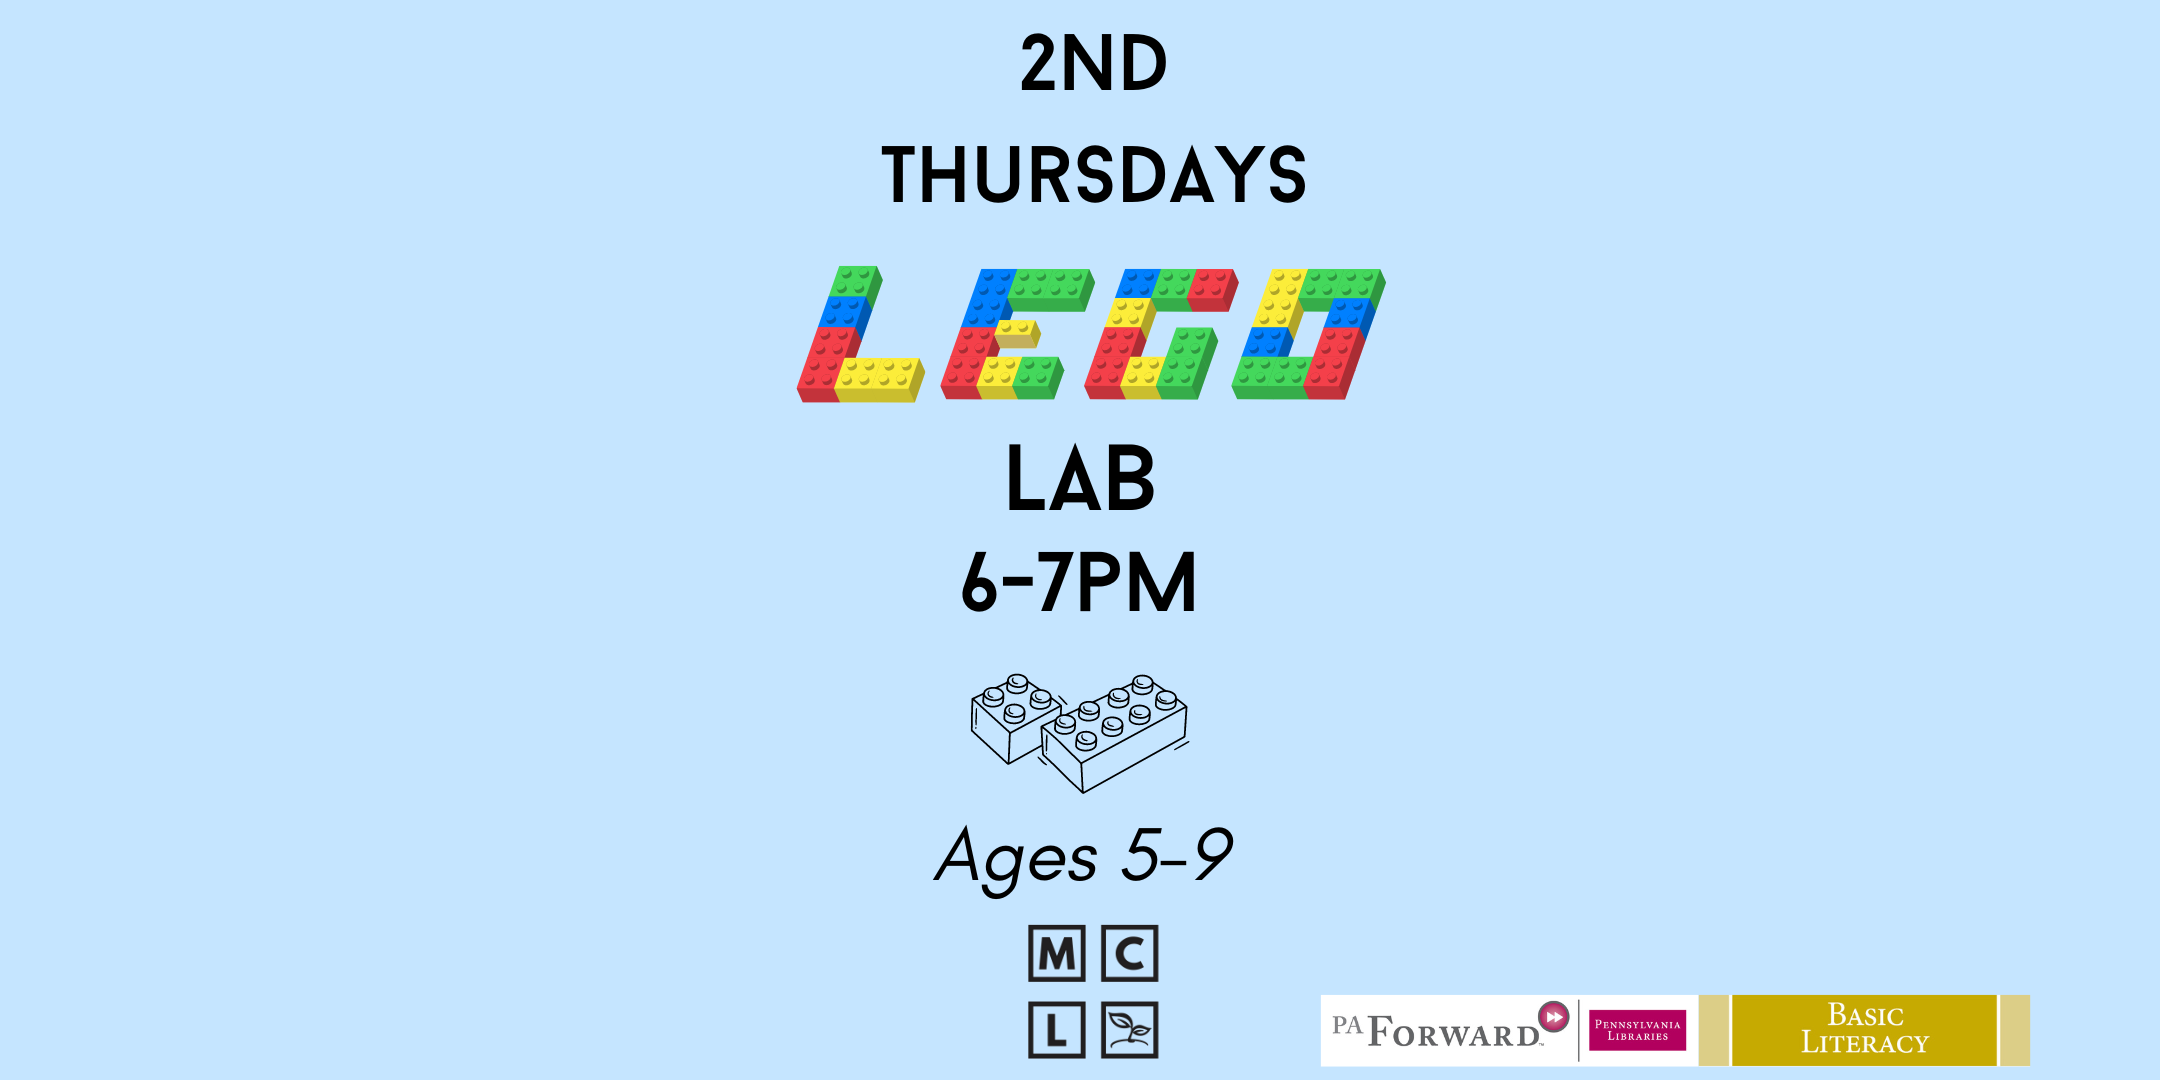 Lego Lab 2nd Thursdays at 6pm for ages 5-9